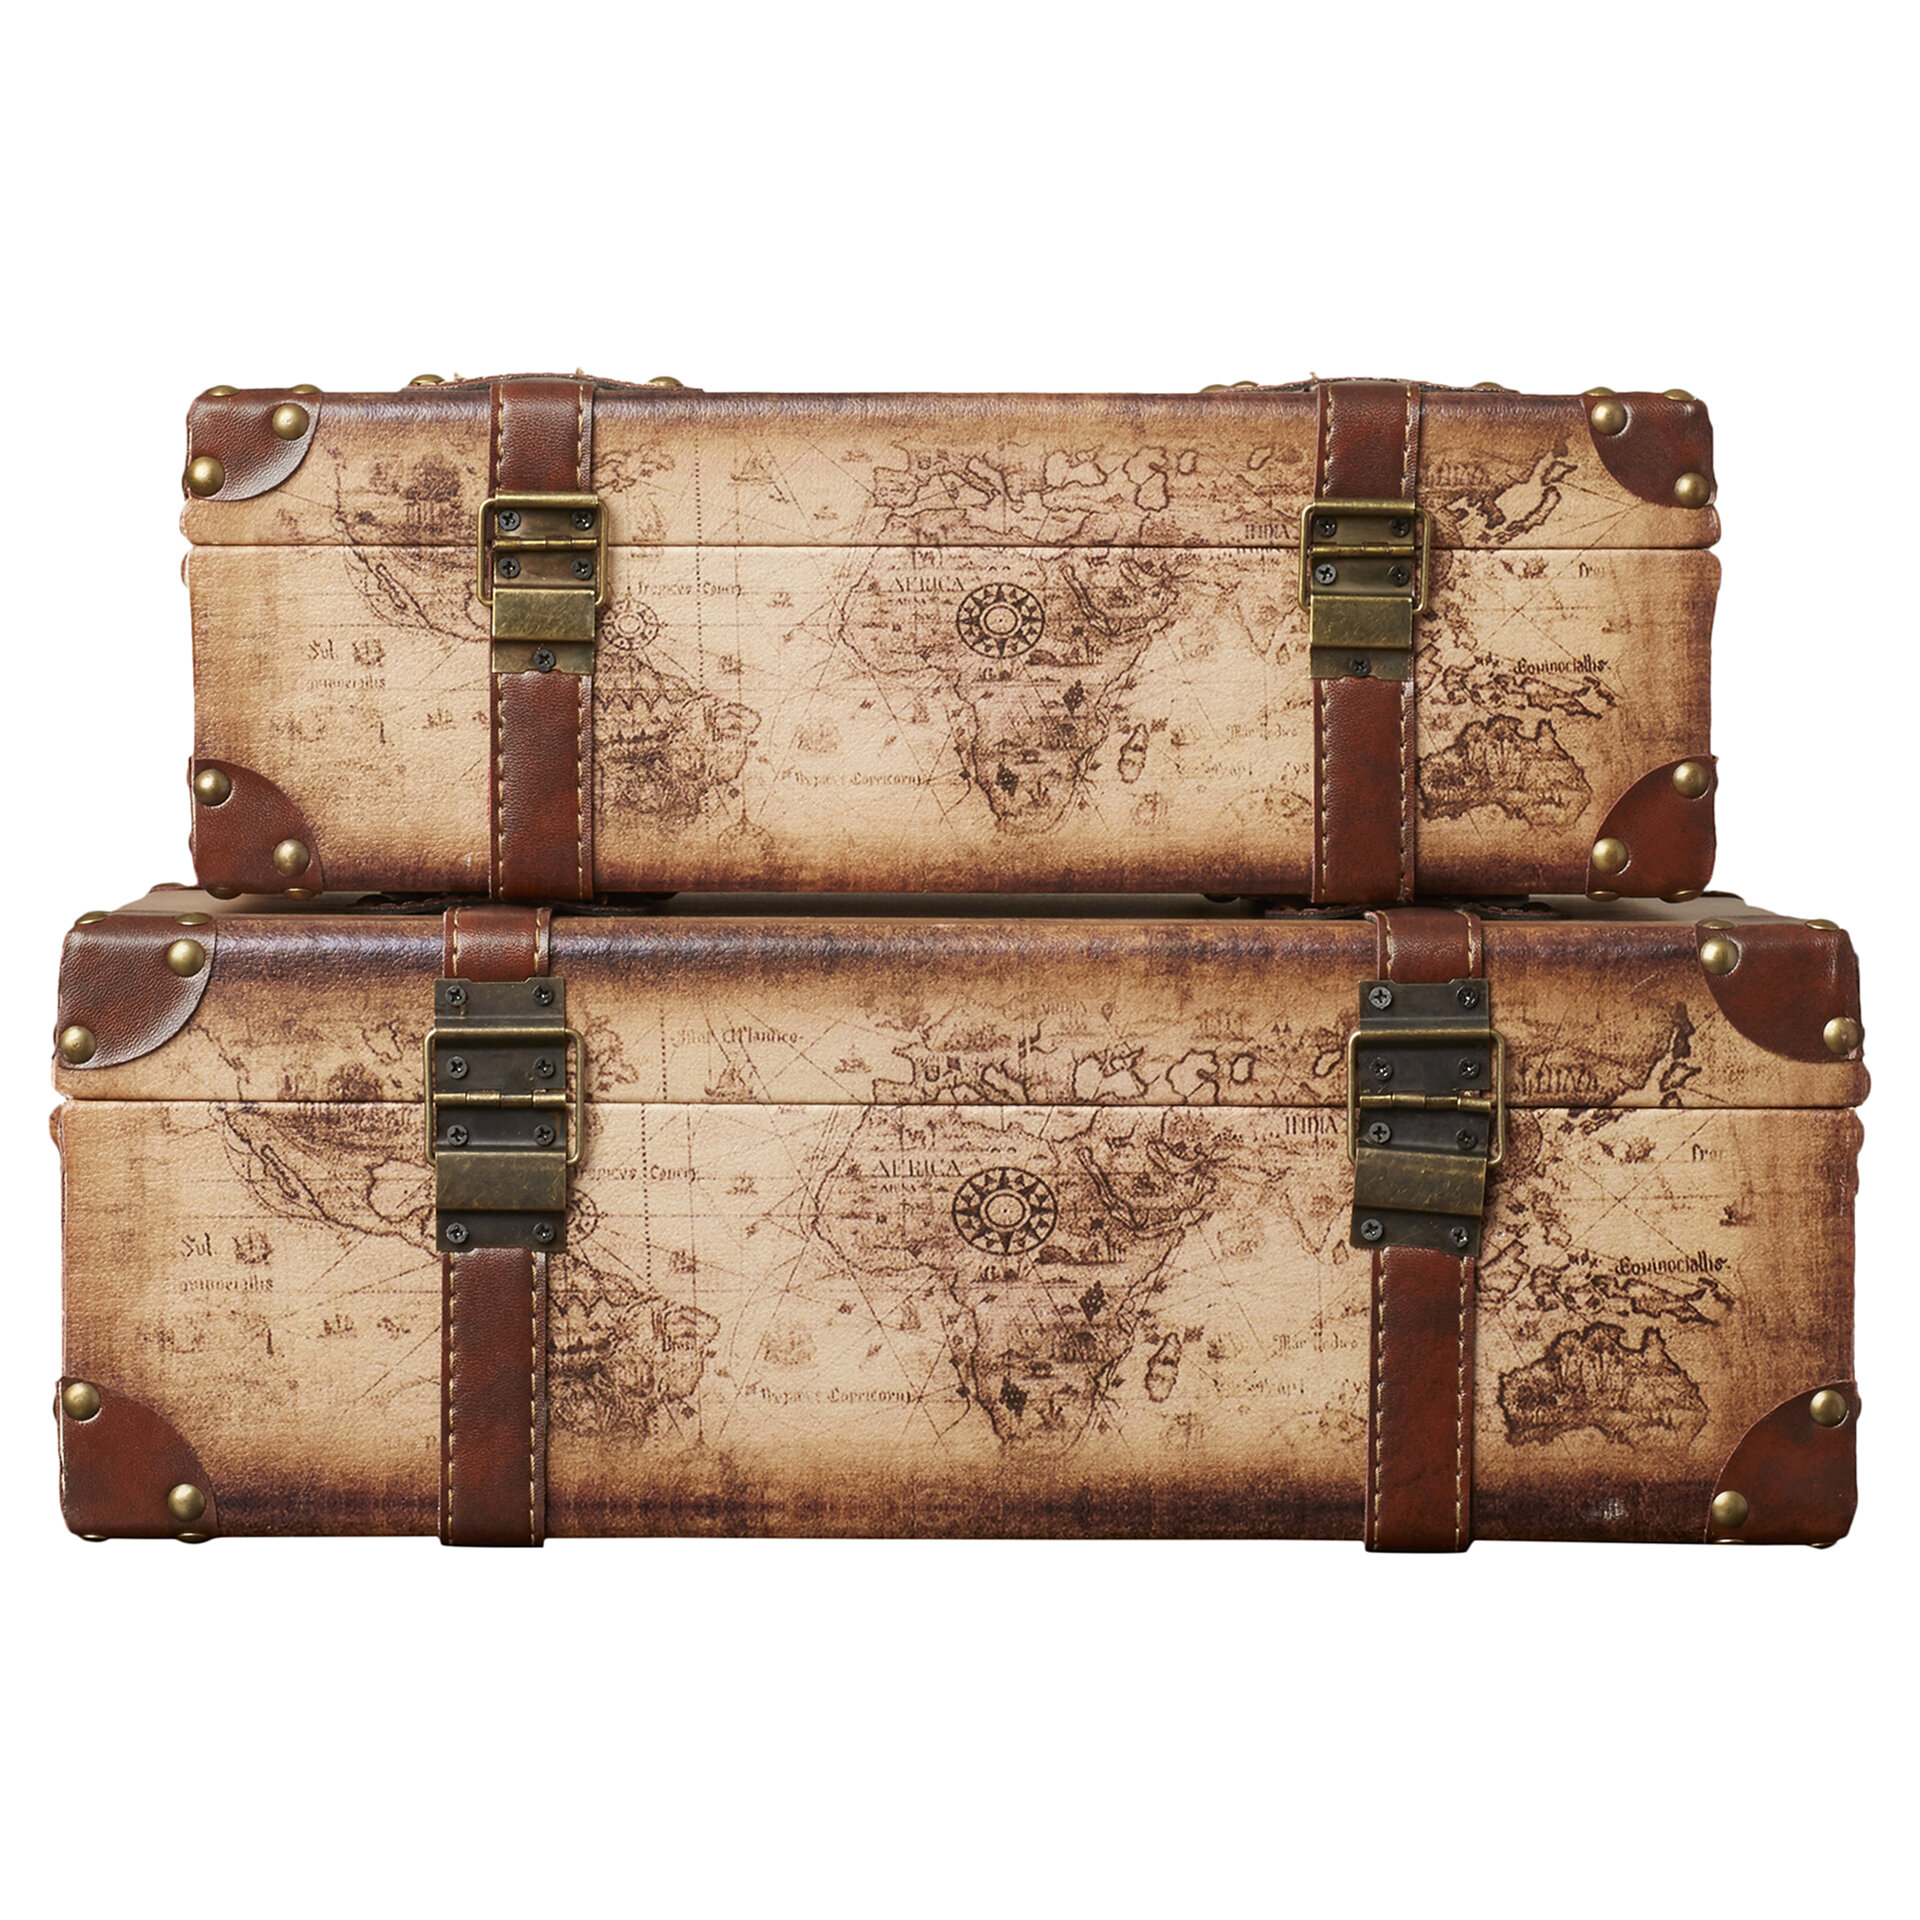 Vintiquewise 2-Colored Vintage Style Luggage Suitcase/Trunk, Set of 2